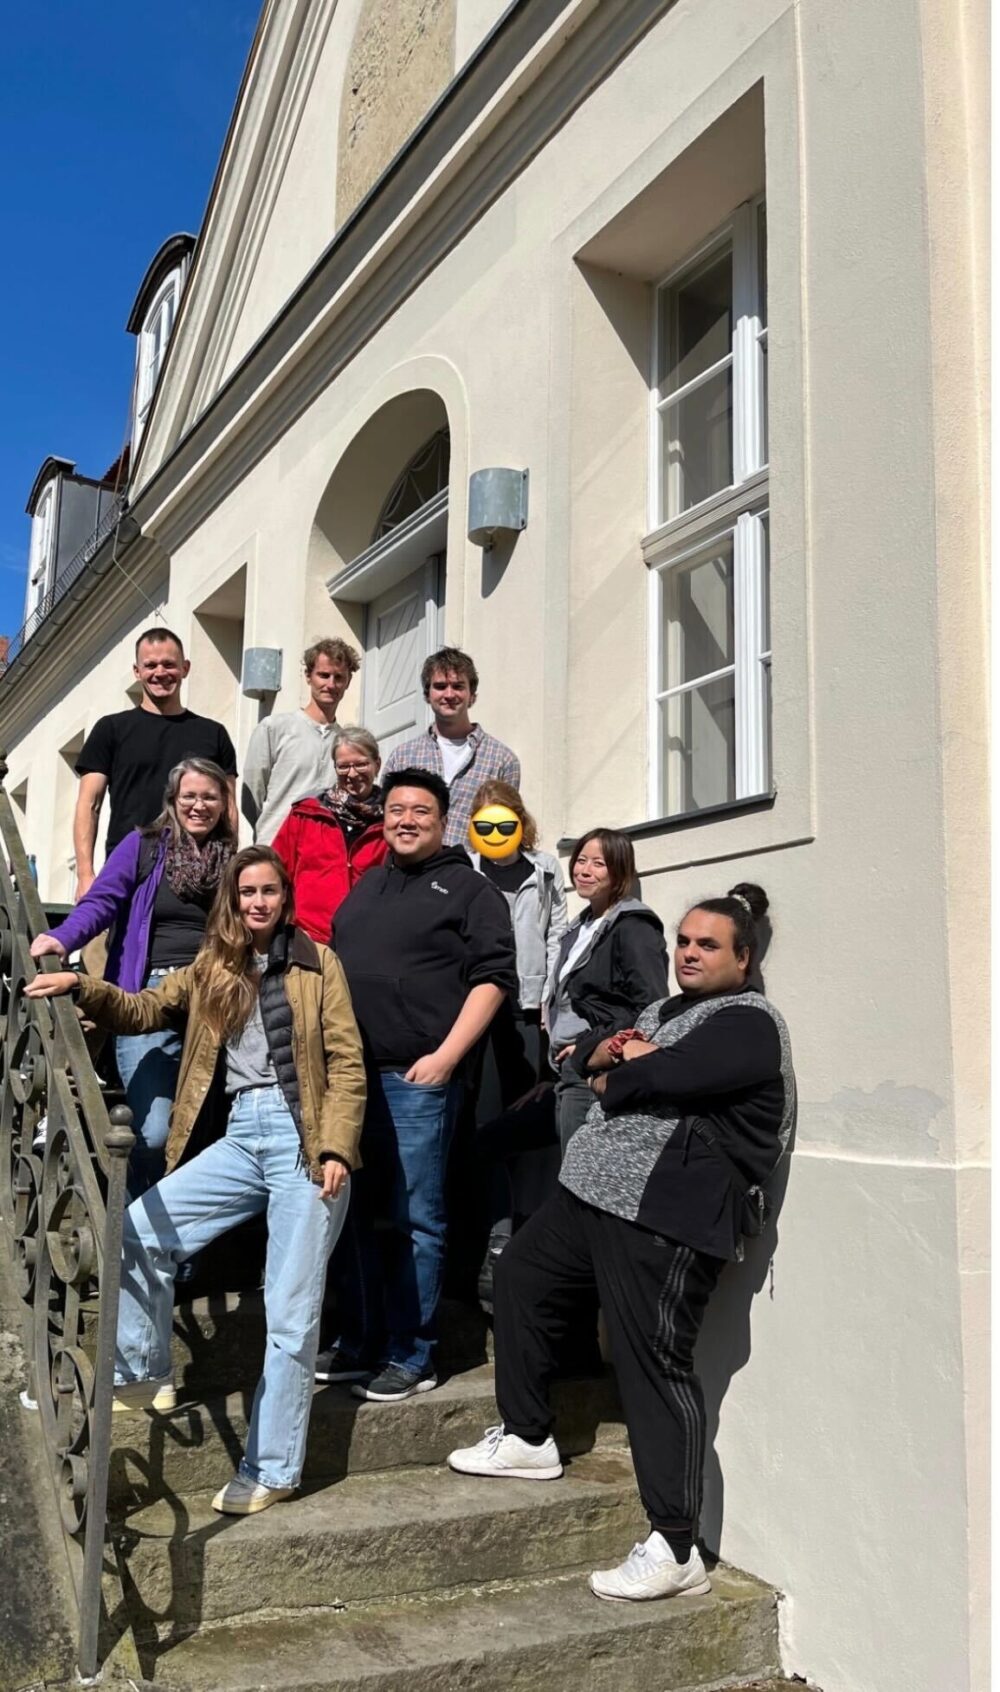 The STF team (ten people) standing on stairs outdoors on a very sunny day at Coconat in Bad Belzig.